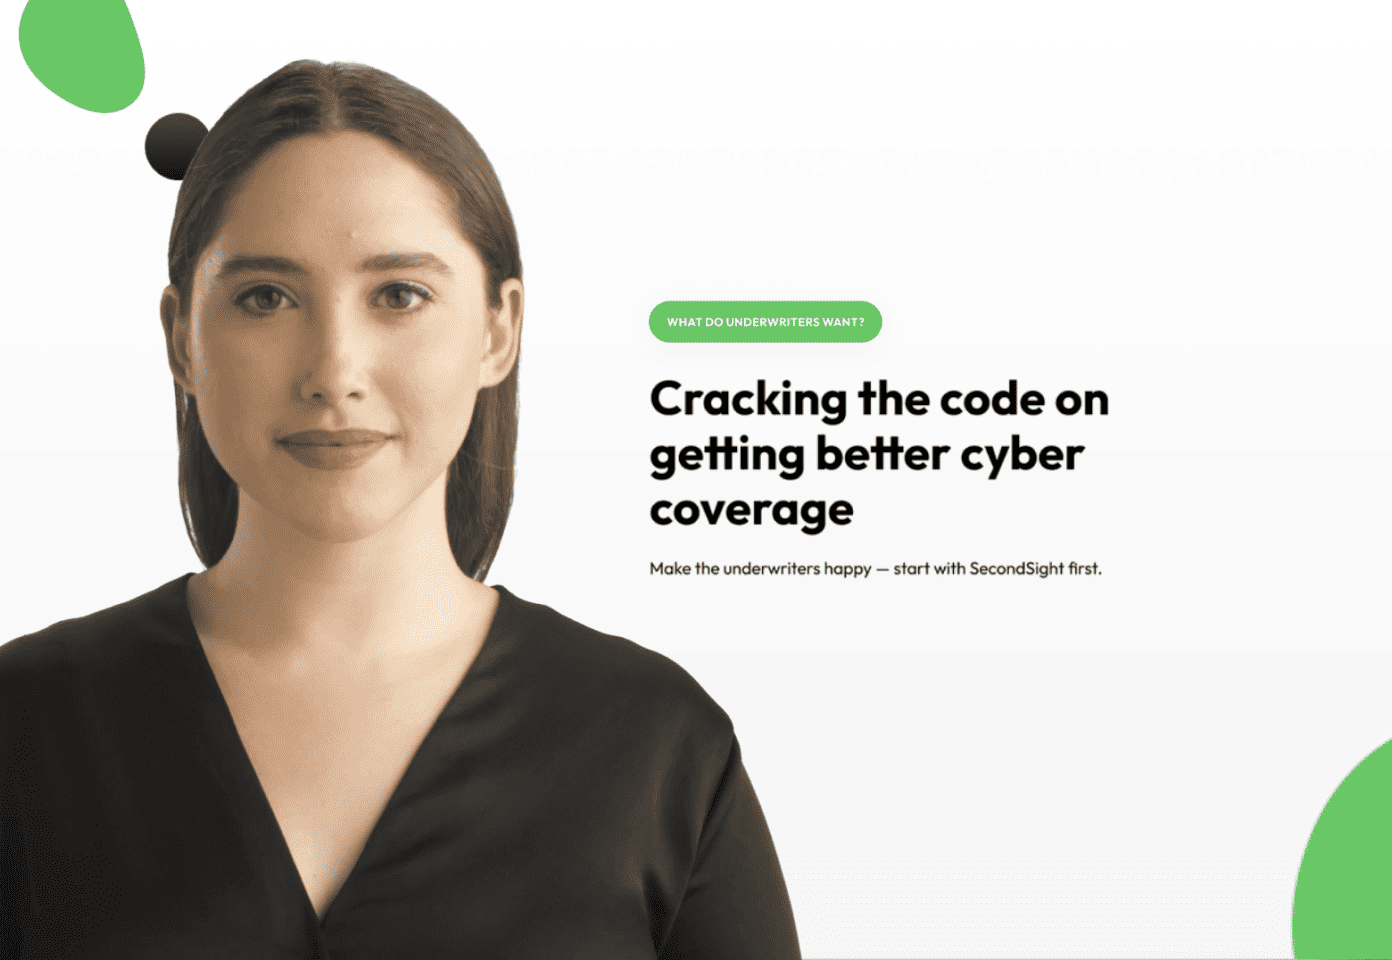 Cracking the code to get better cyber coverage